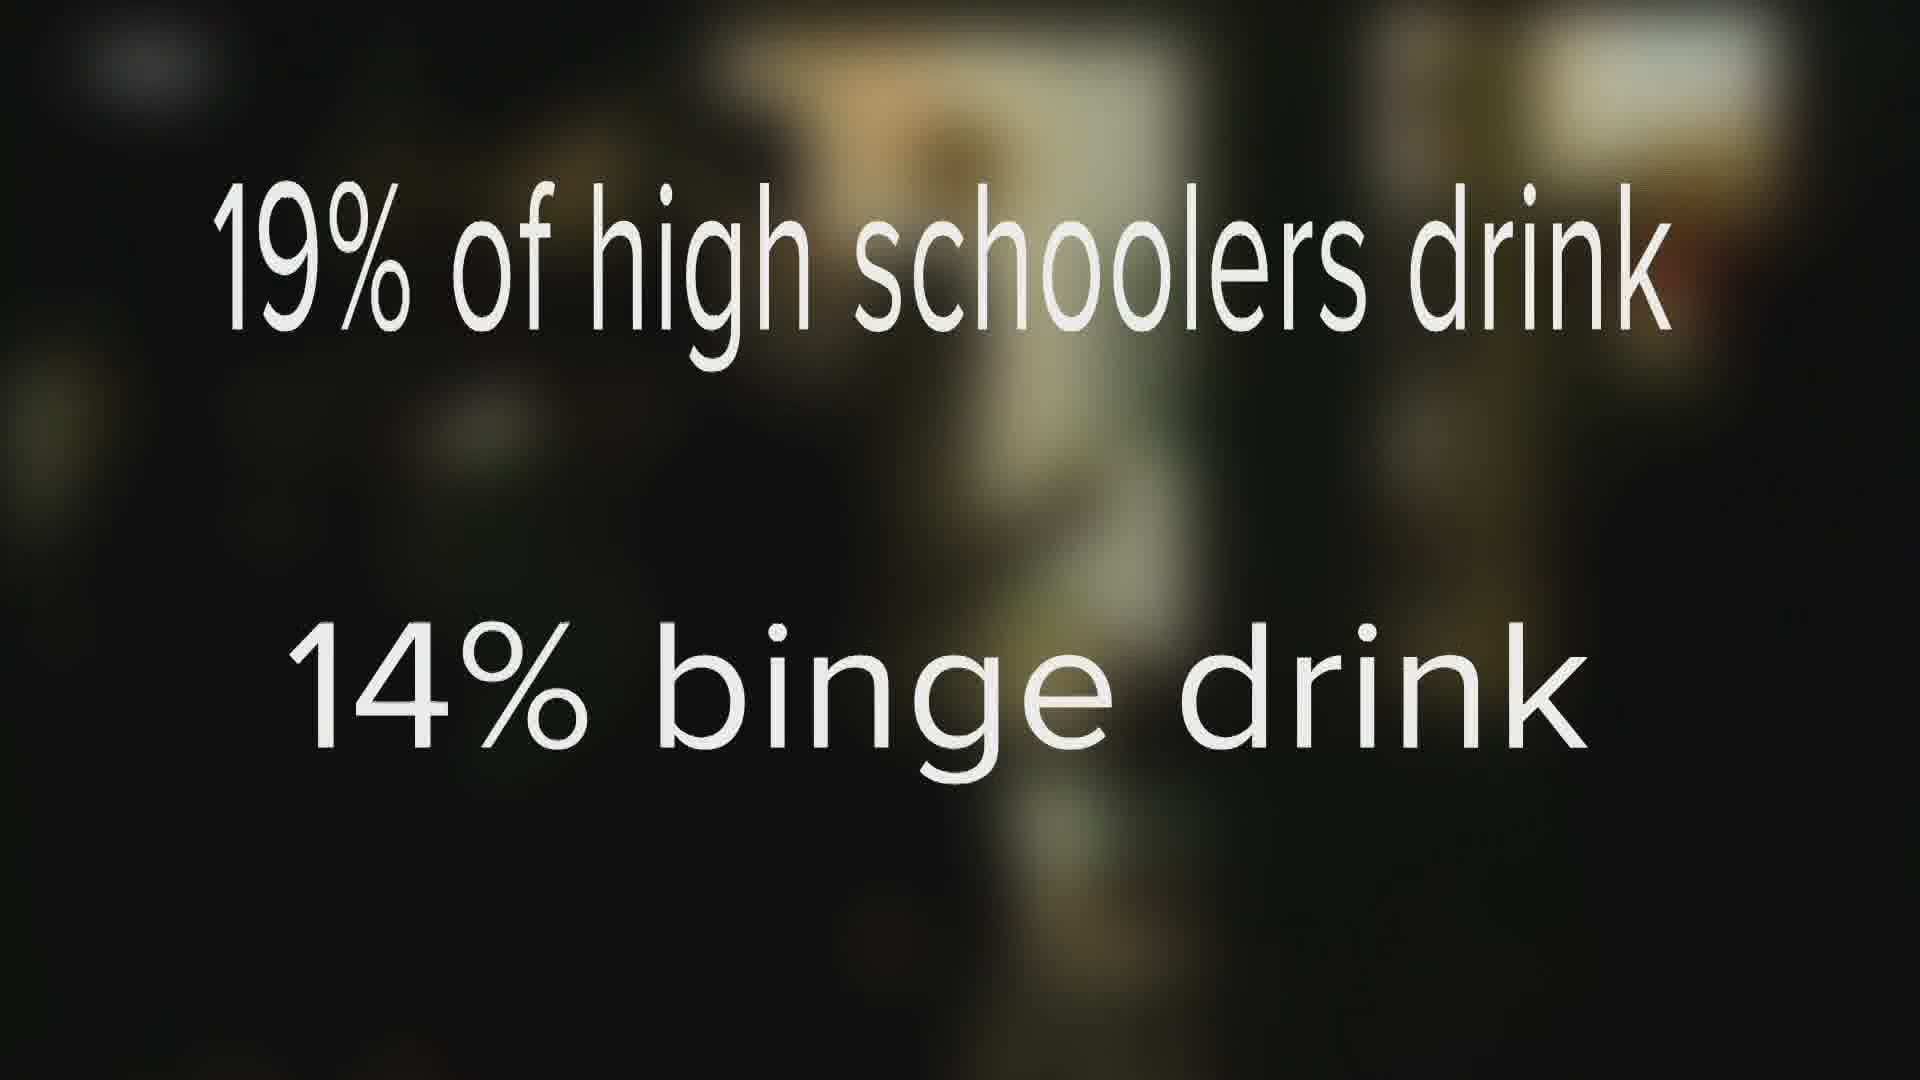 According to the Centers for Disease Control, in 2019, 19% of high schoolers across the country said they drank alcohol. 14% said they binge drink.